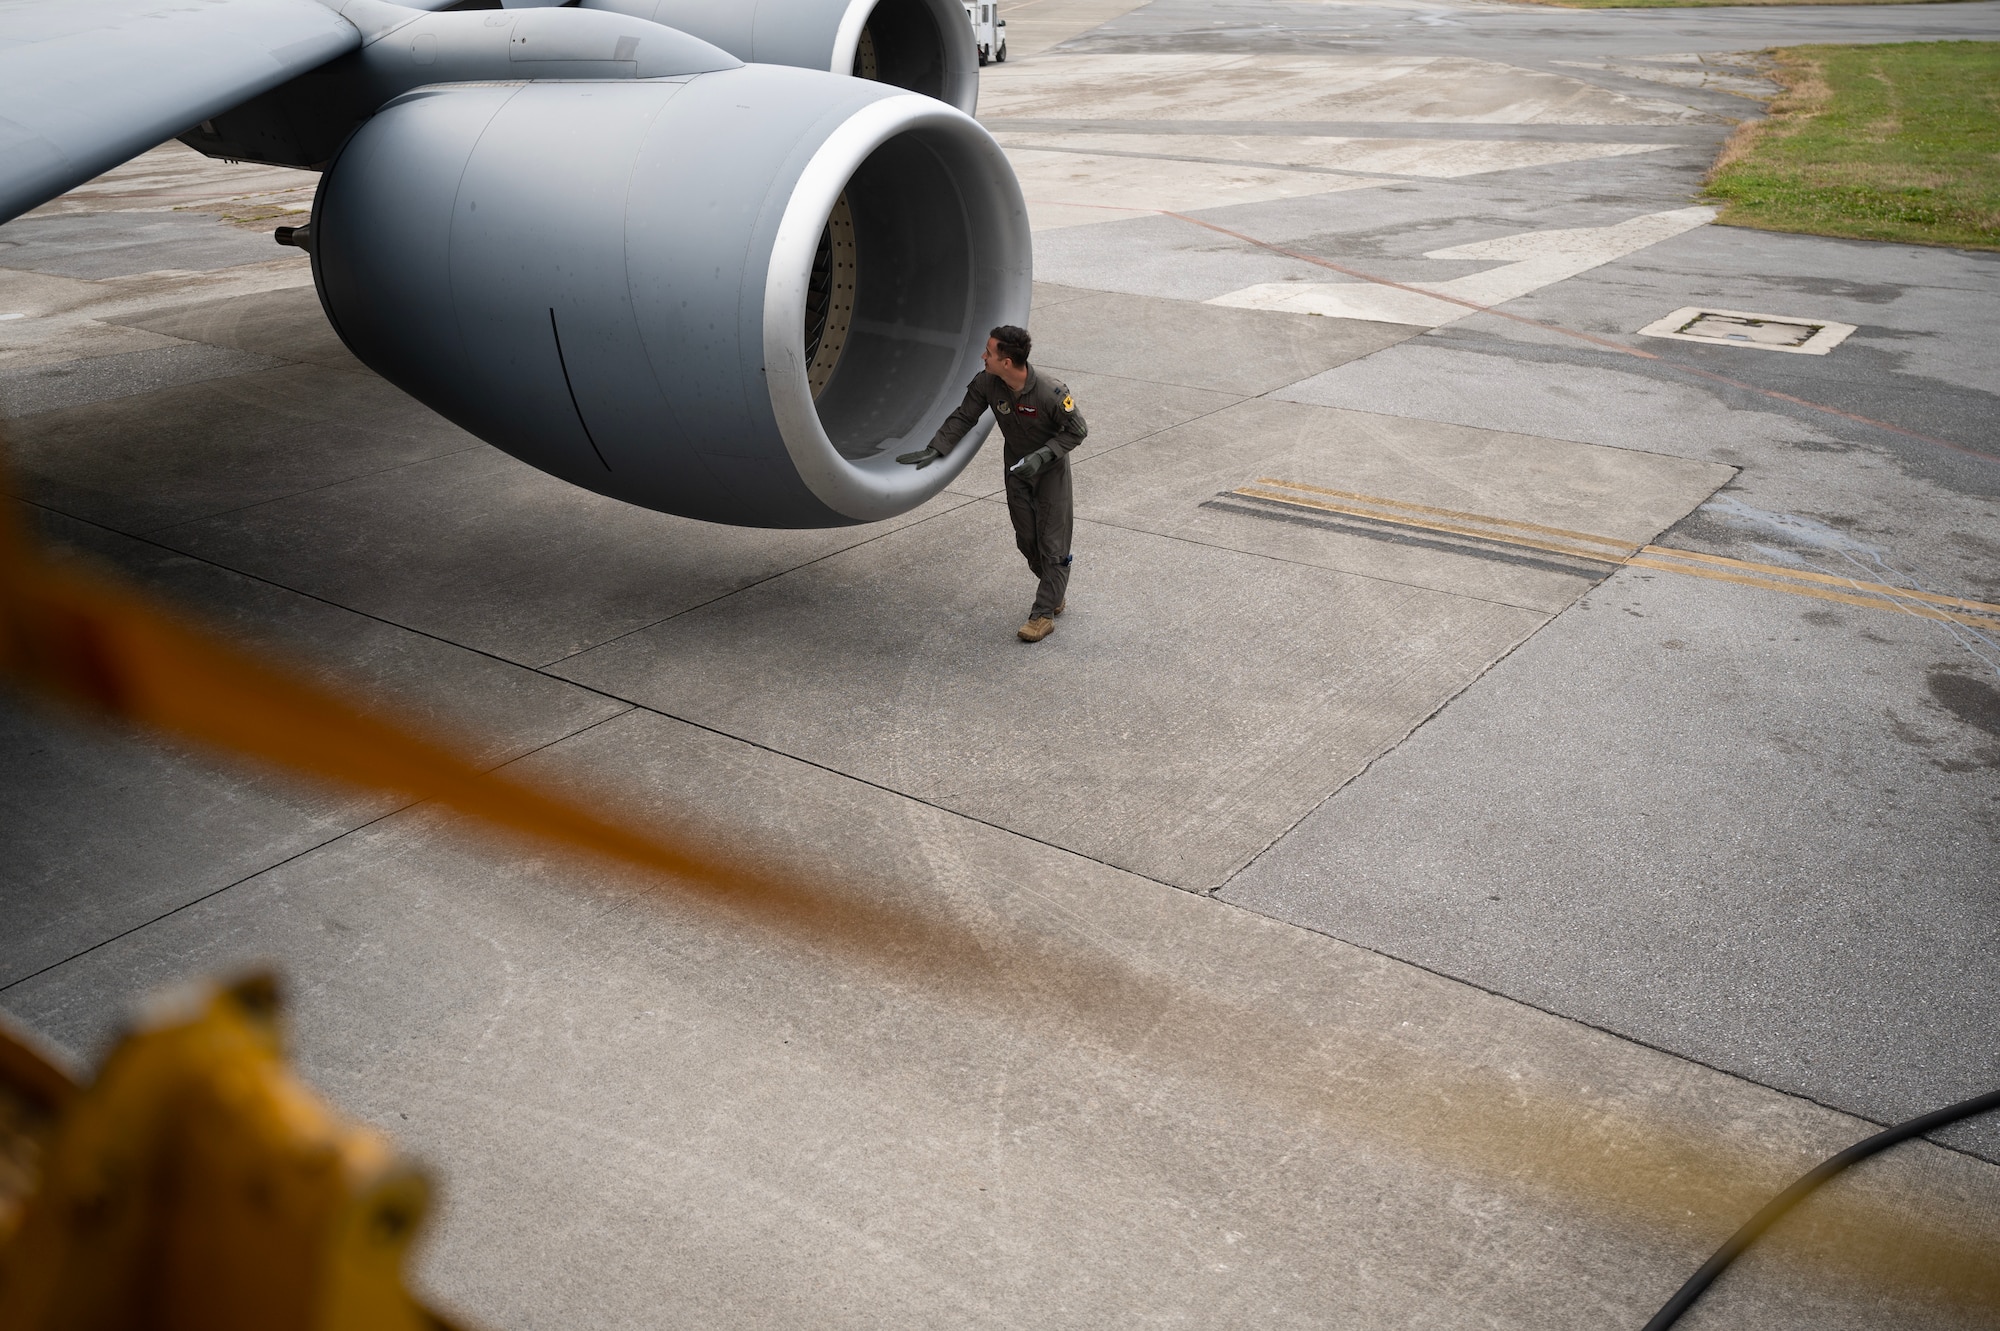 U.S. Air Force Capt. Justin Berndt, 909th Air Refueling Squadron KC-135 Stratotanker pilot, conducts pre-flight checks prior to departure from Kadena Air Base, Japan, March 13, 2023 in support of a subject matter expert exchange and bilateral training mission with the Philippine Air Force. Enhancing interoperability between the U.S. and Philippine air forces contributes to the long-term advancement of our nations’ shared interest in maintaining a free and open Indo-Pacific. (U.S. Air Force photo by Senior Airman Jessi Roth)